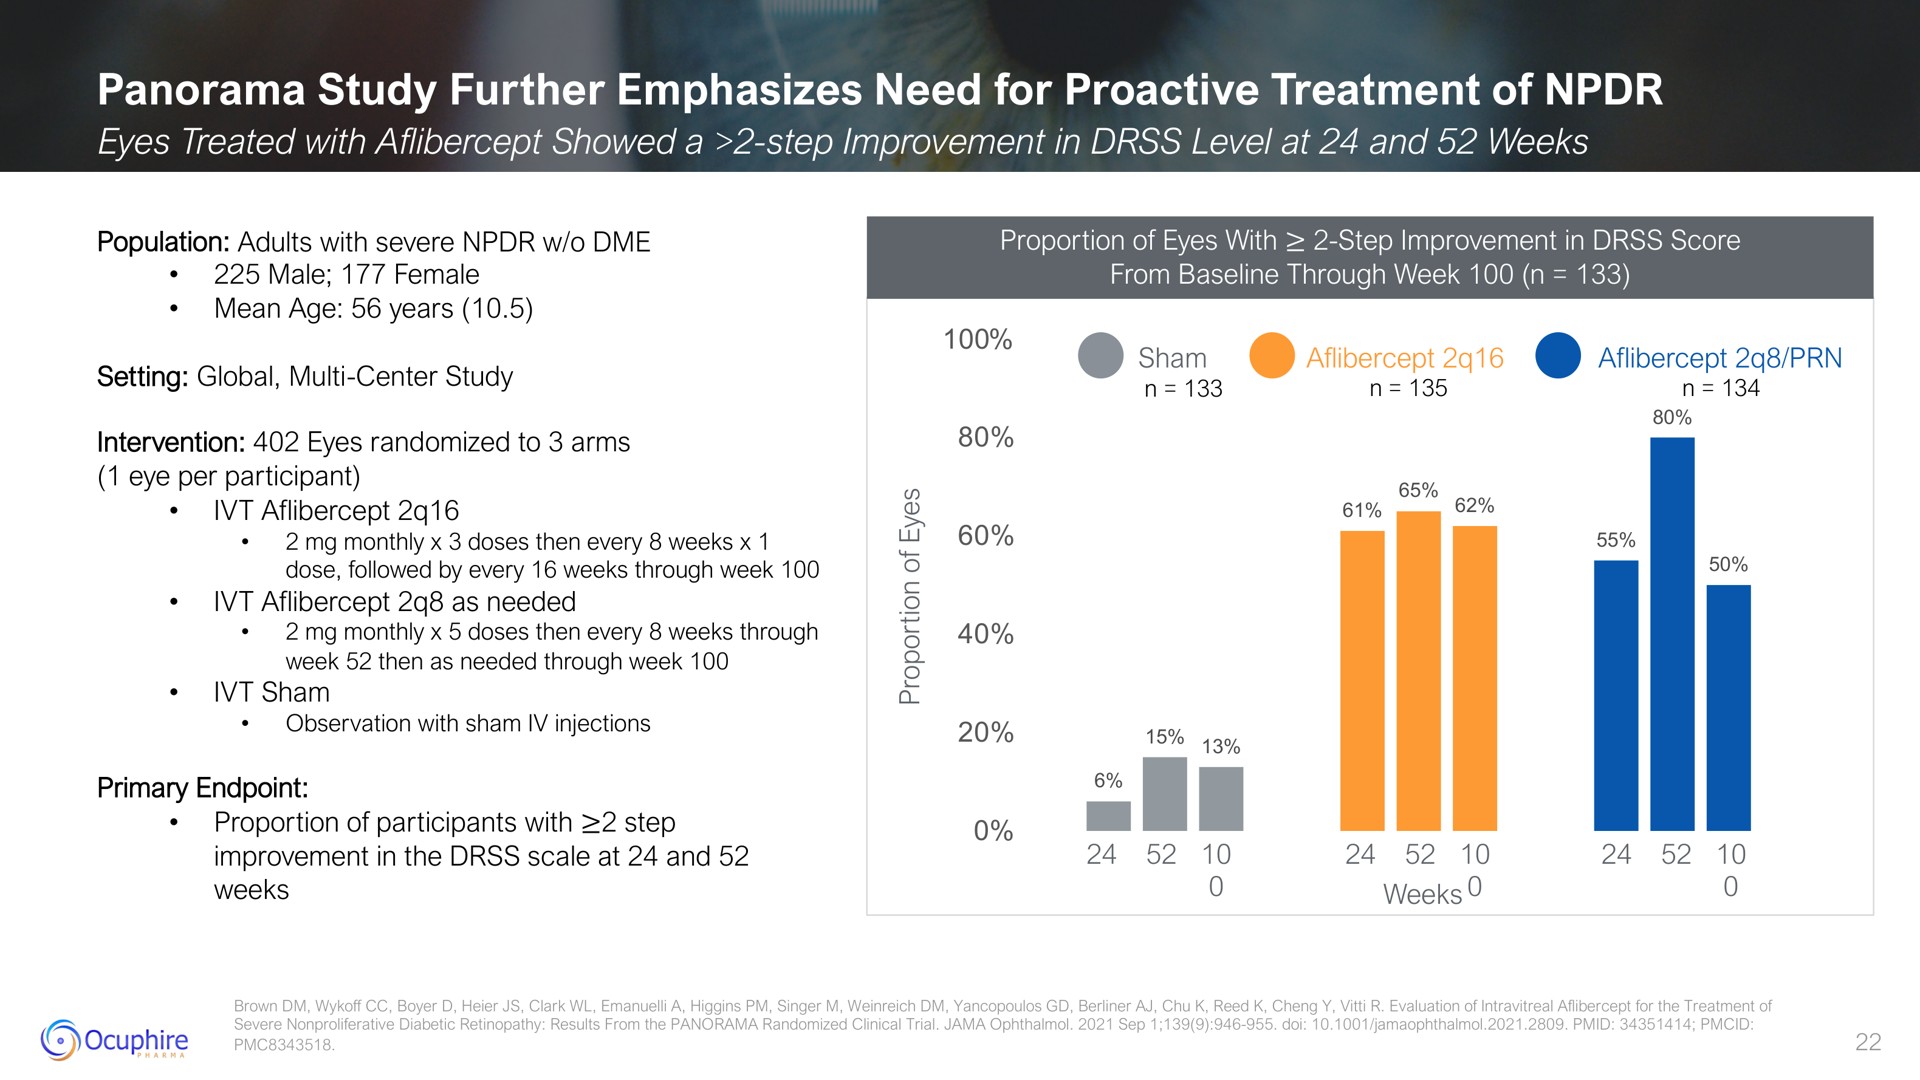 panorama study further emphasizes need for treatment of sham | Ocuphire Pharma